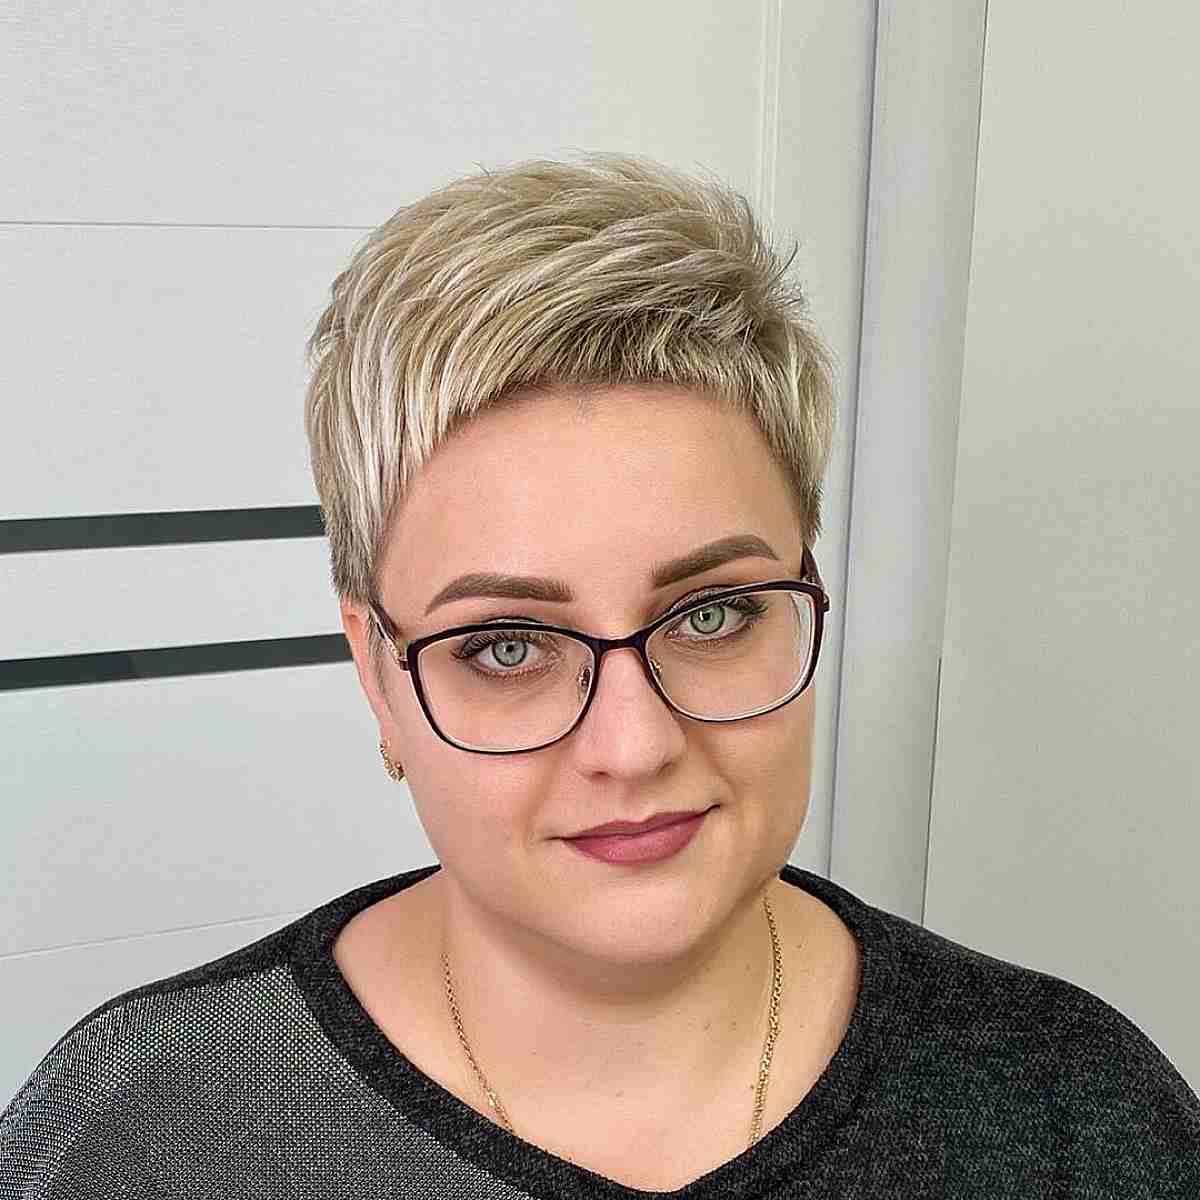 Very Short Side-Swept Pixie Crop Style with Choppy Layers